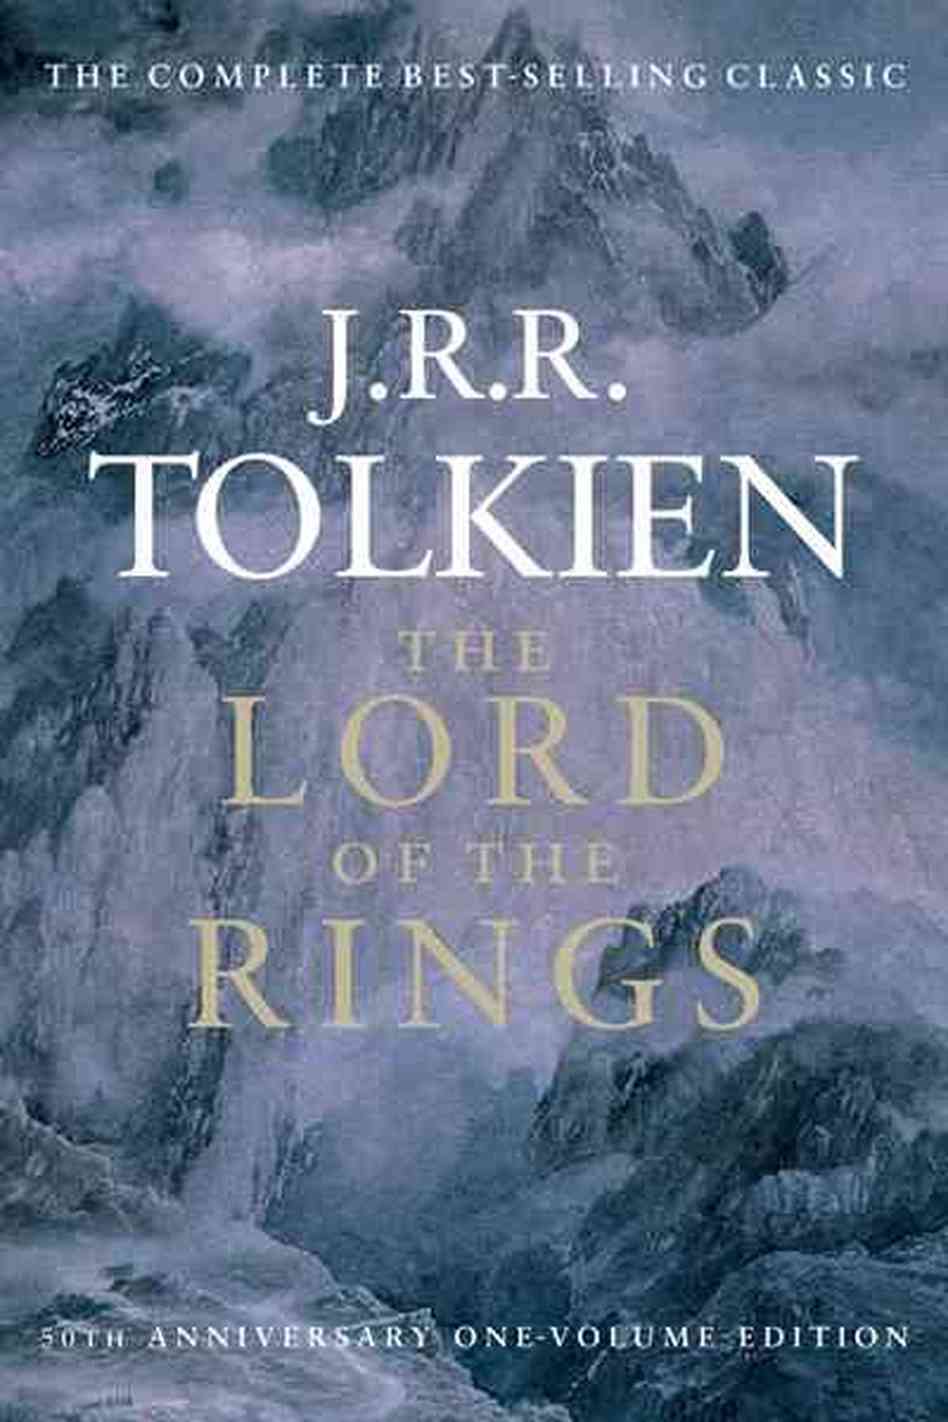 The Lord of the Rings - book should read